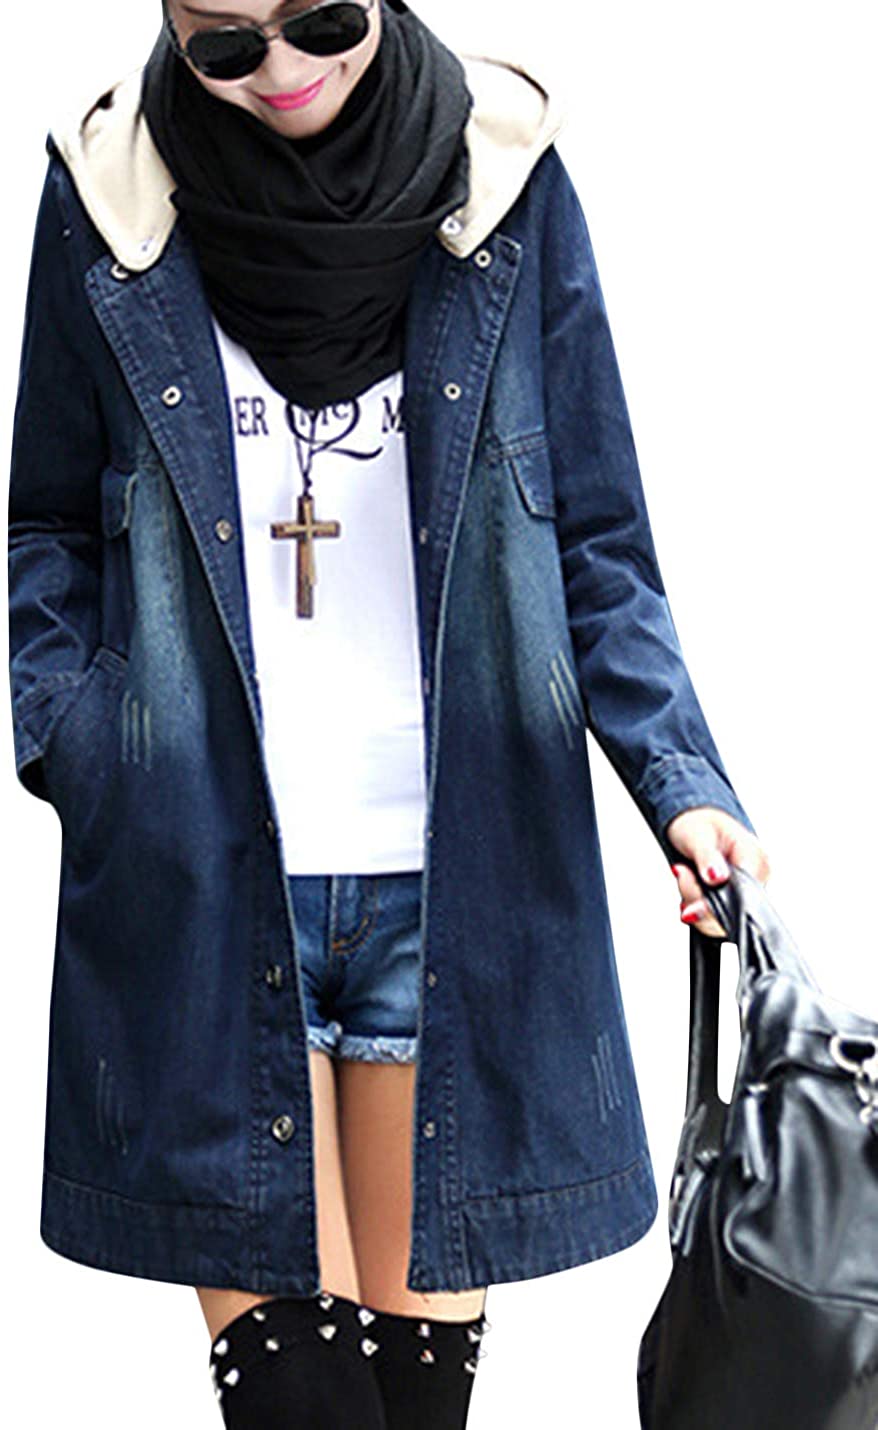 Tanming Womens Casual Hooded Buttons Up Epaulet Denim Jean Jacket Coats